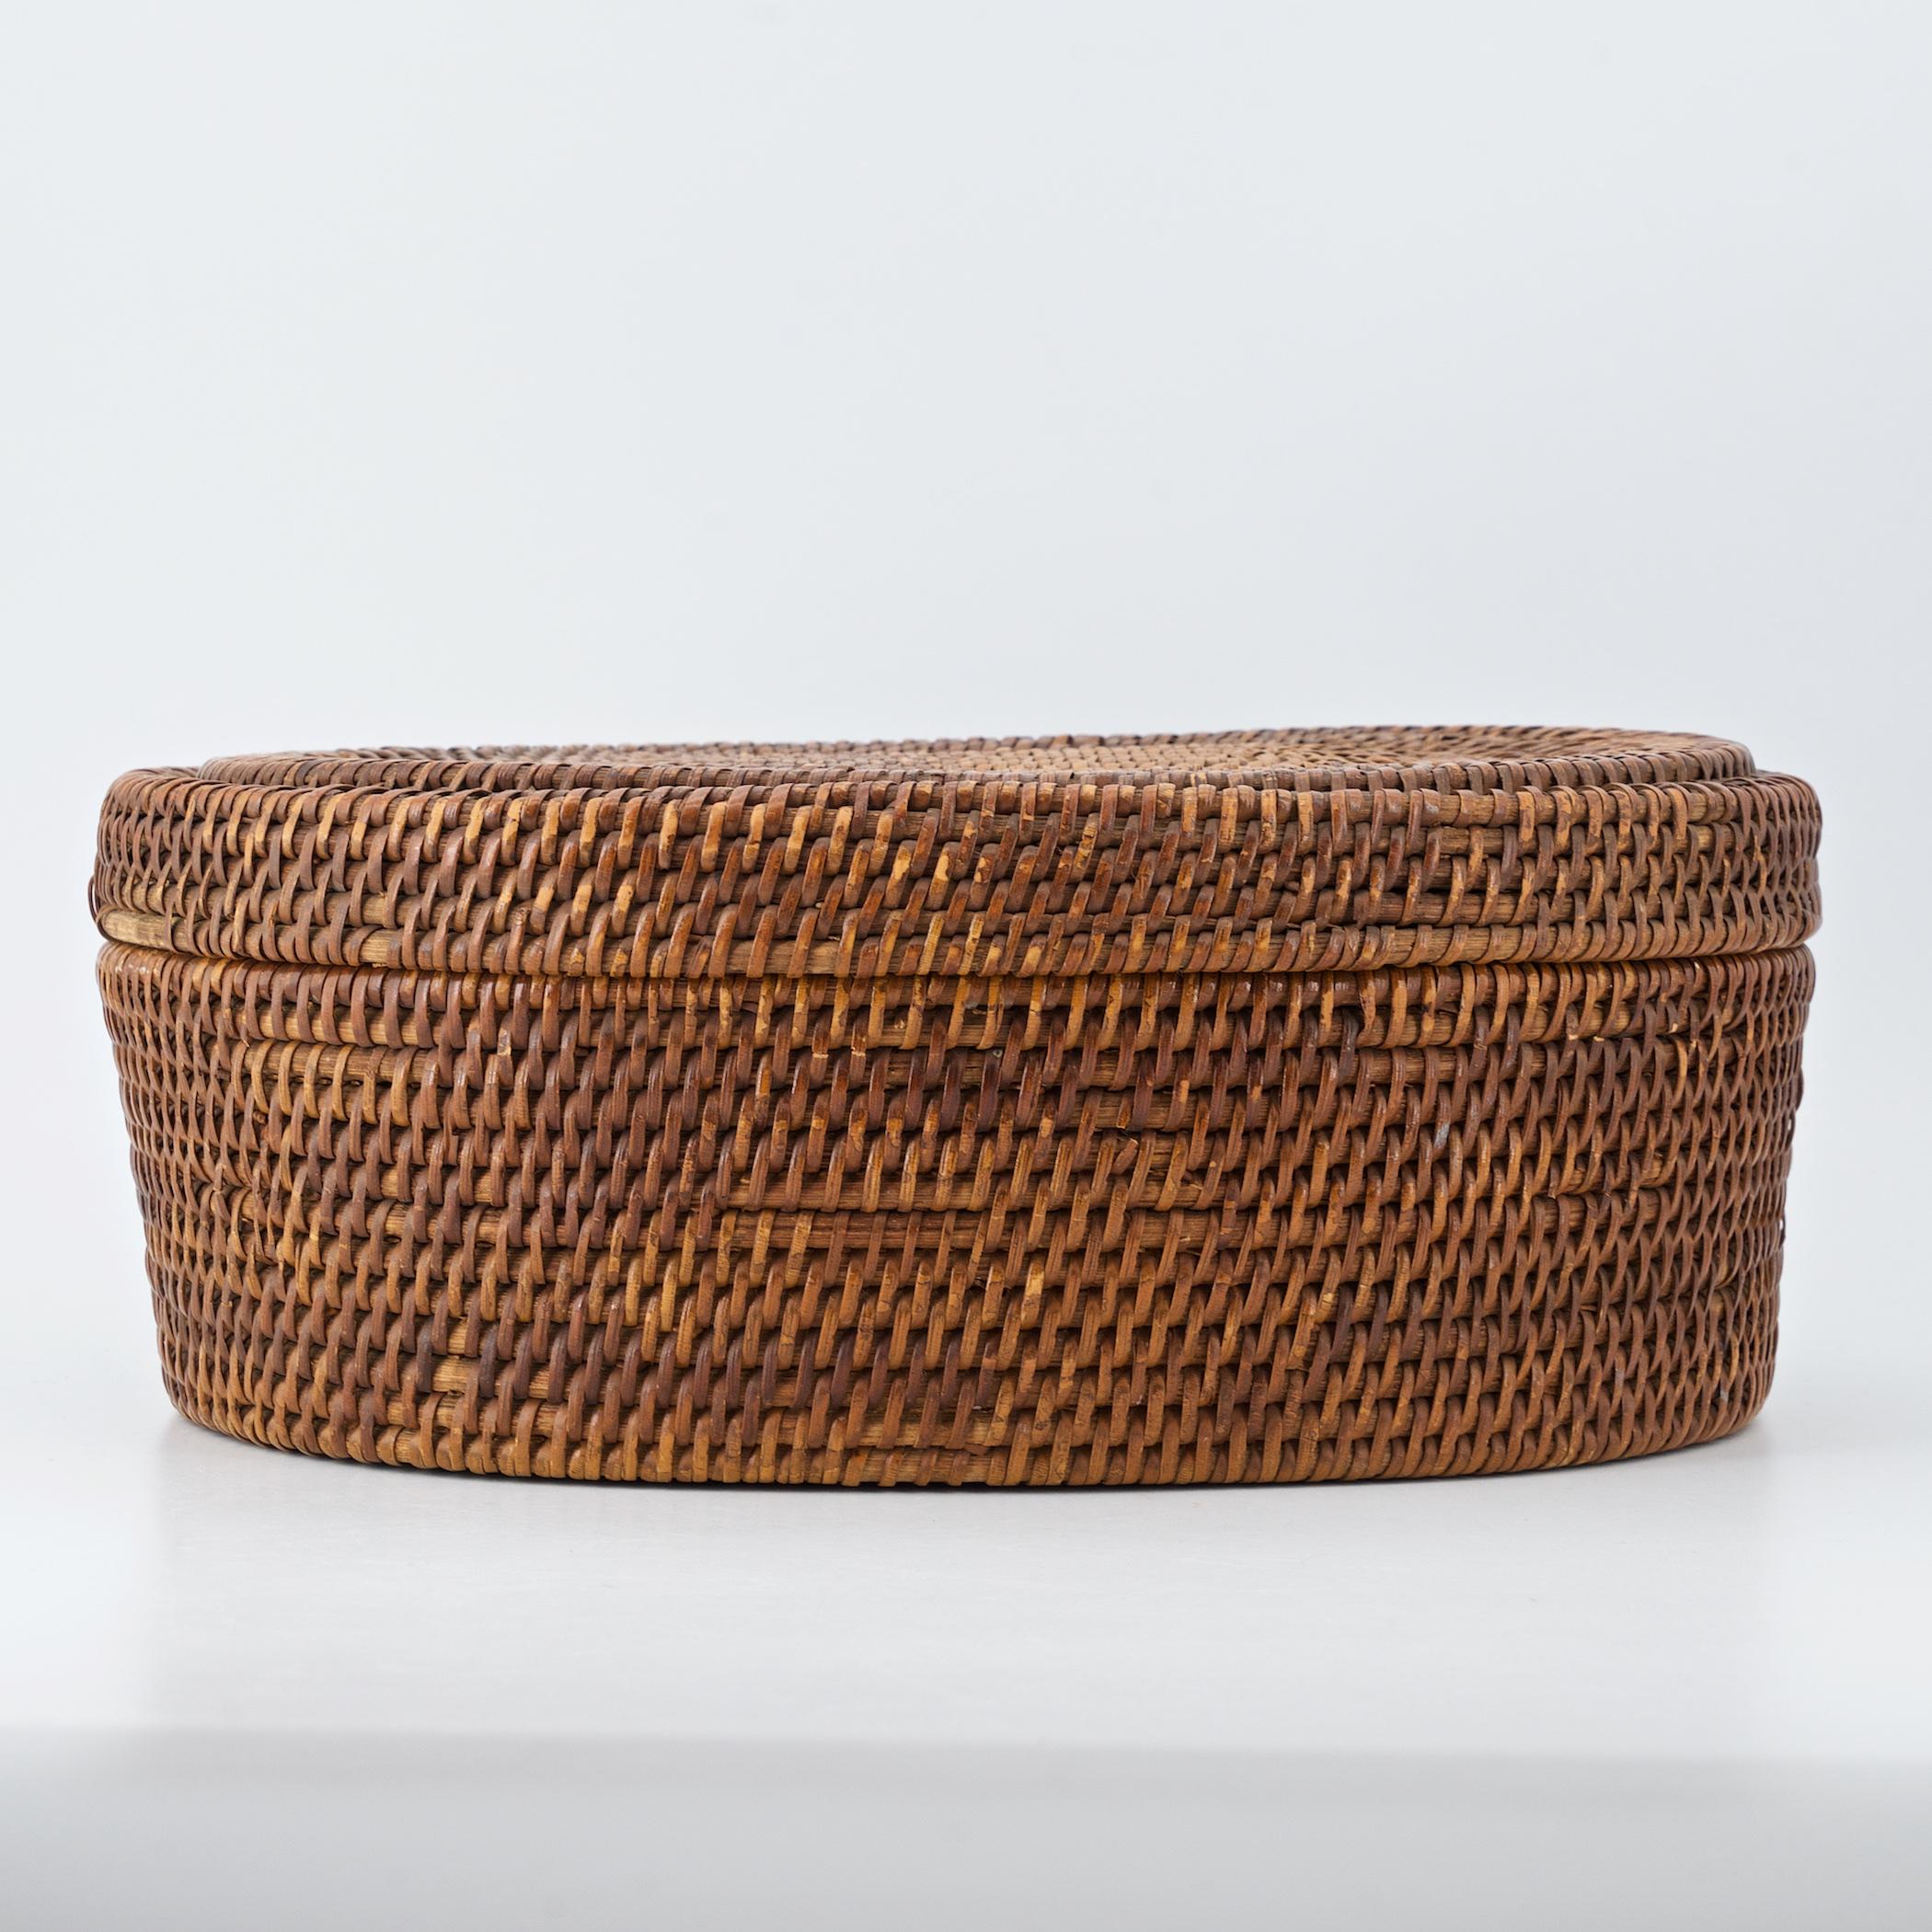 Hand-Crafted Native American Indian Woven Coiled Lidded Oval Basket